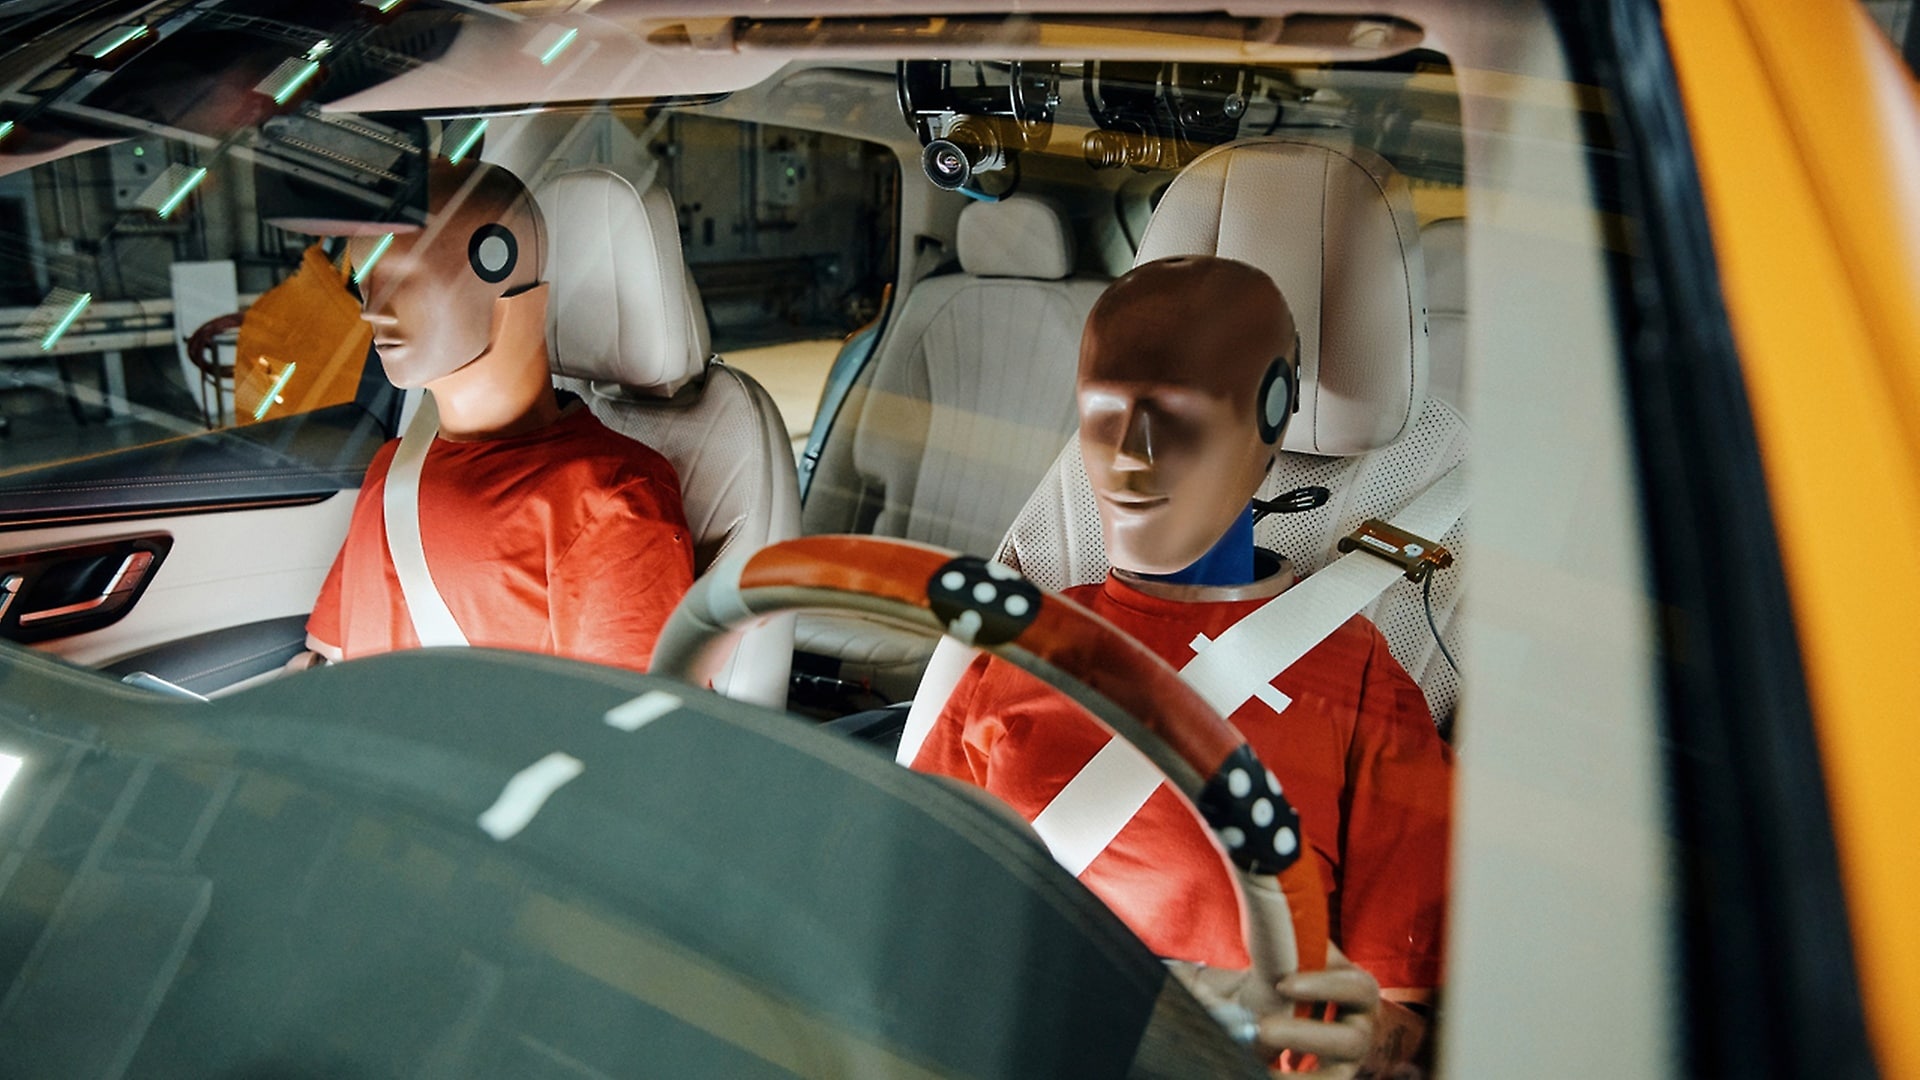 Female dummy types were placed in the driver's seat of both cars. For many years, Mercedes-Benz has used frontal crash tests with female dummies in the front seat to design its protection systems for the widest possible range of customers. 